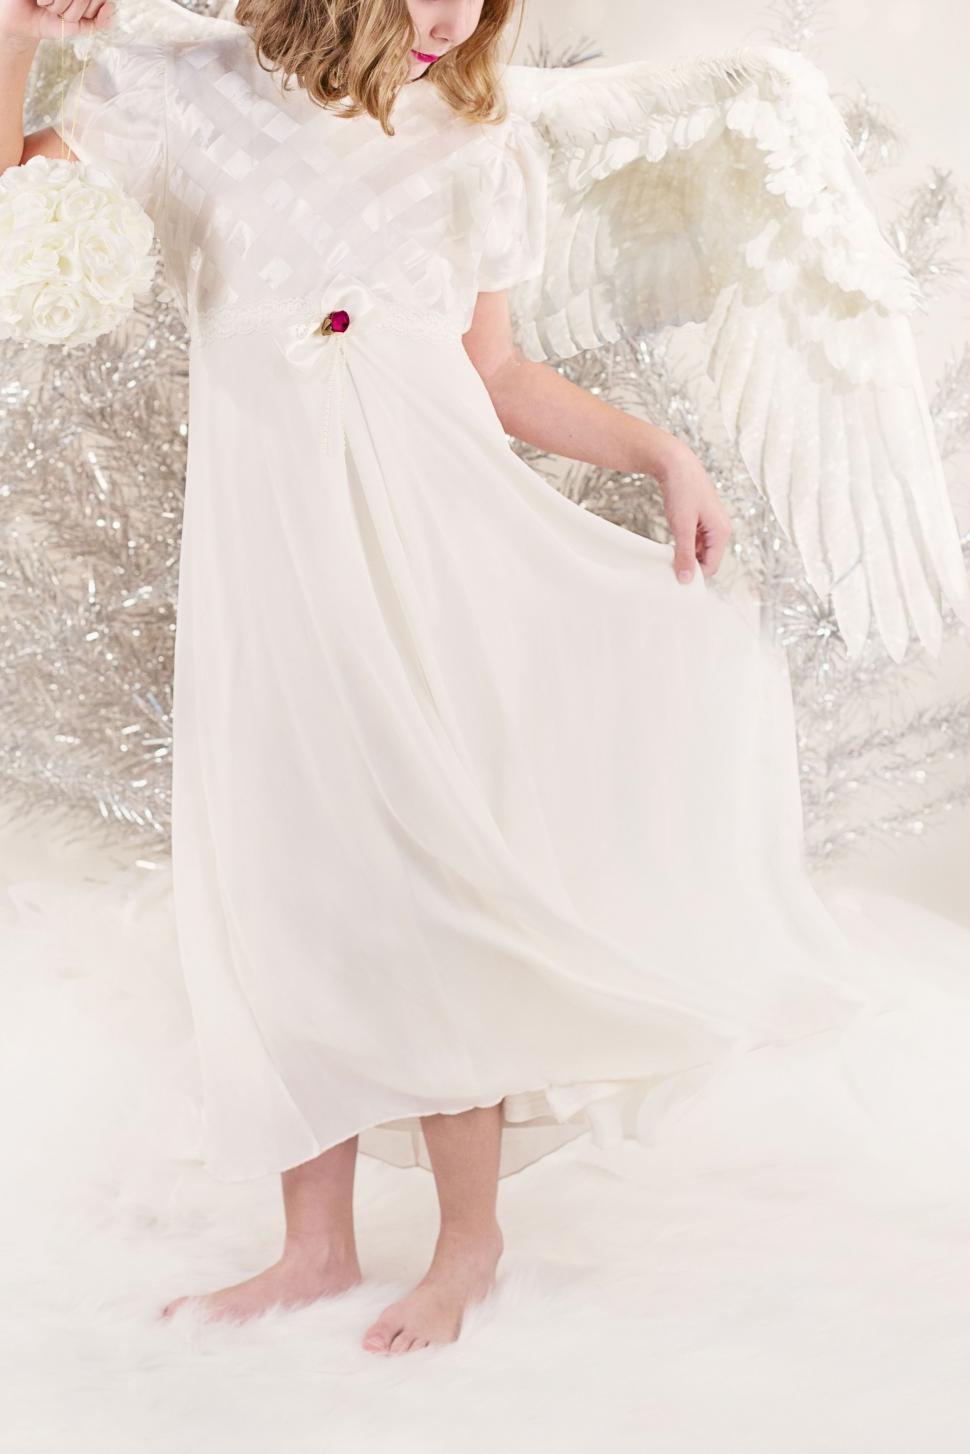 Free Image of Young Girl in Angle Dress 